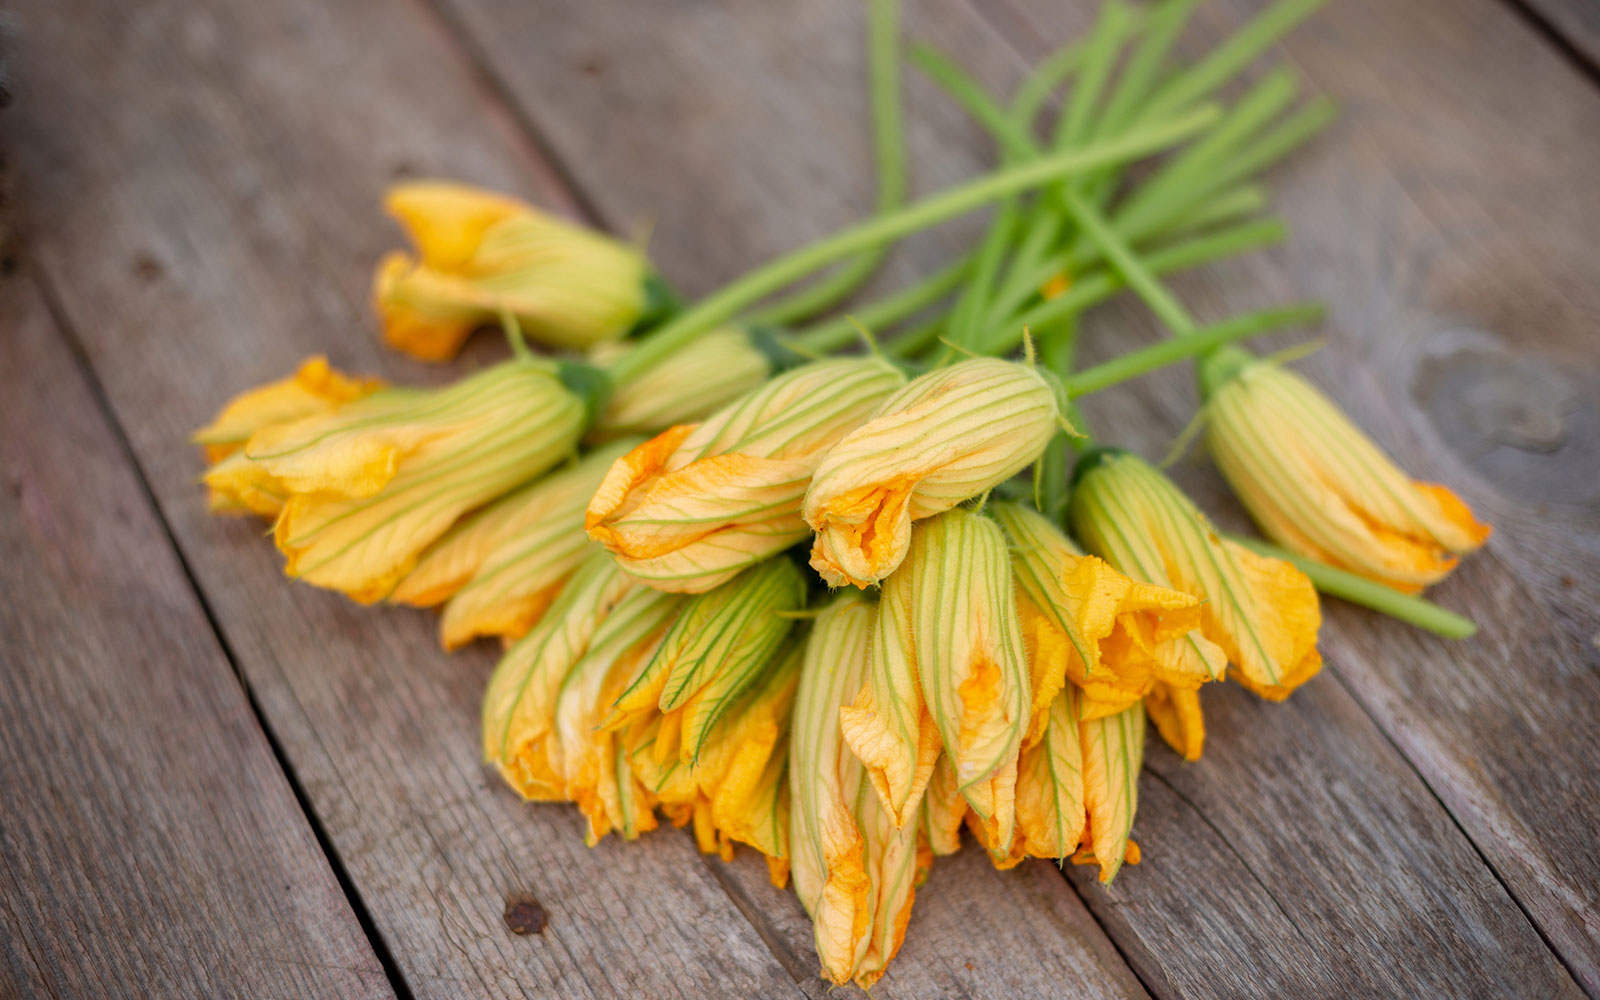 Pasta and zucchini flowers, what a good delicacy